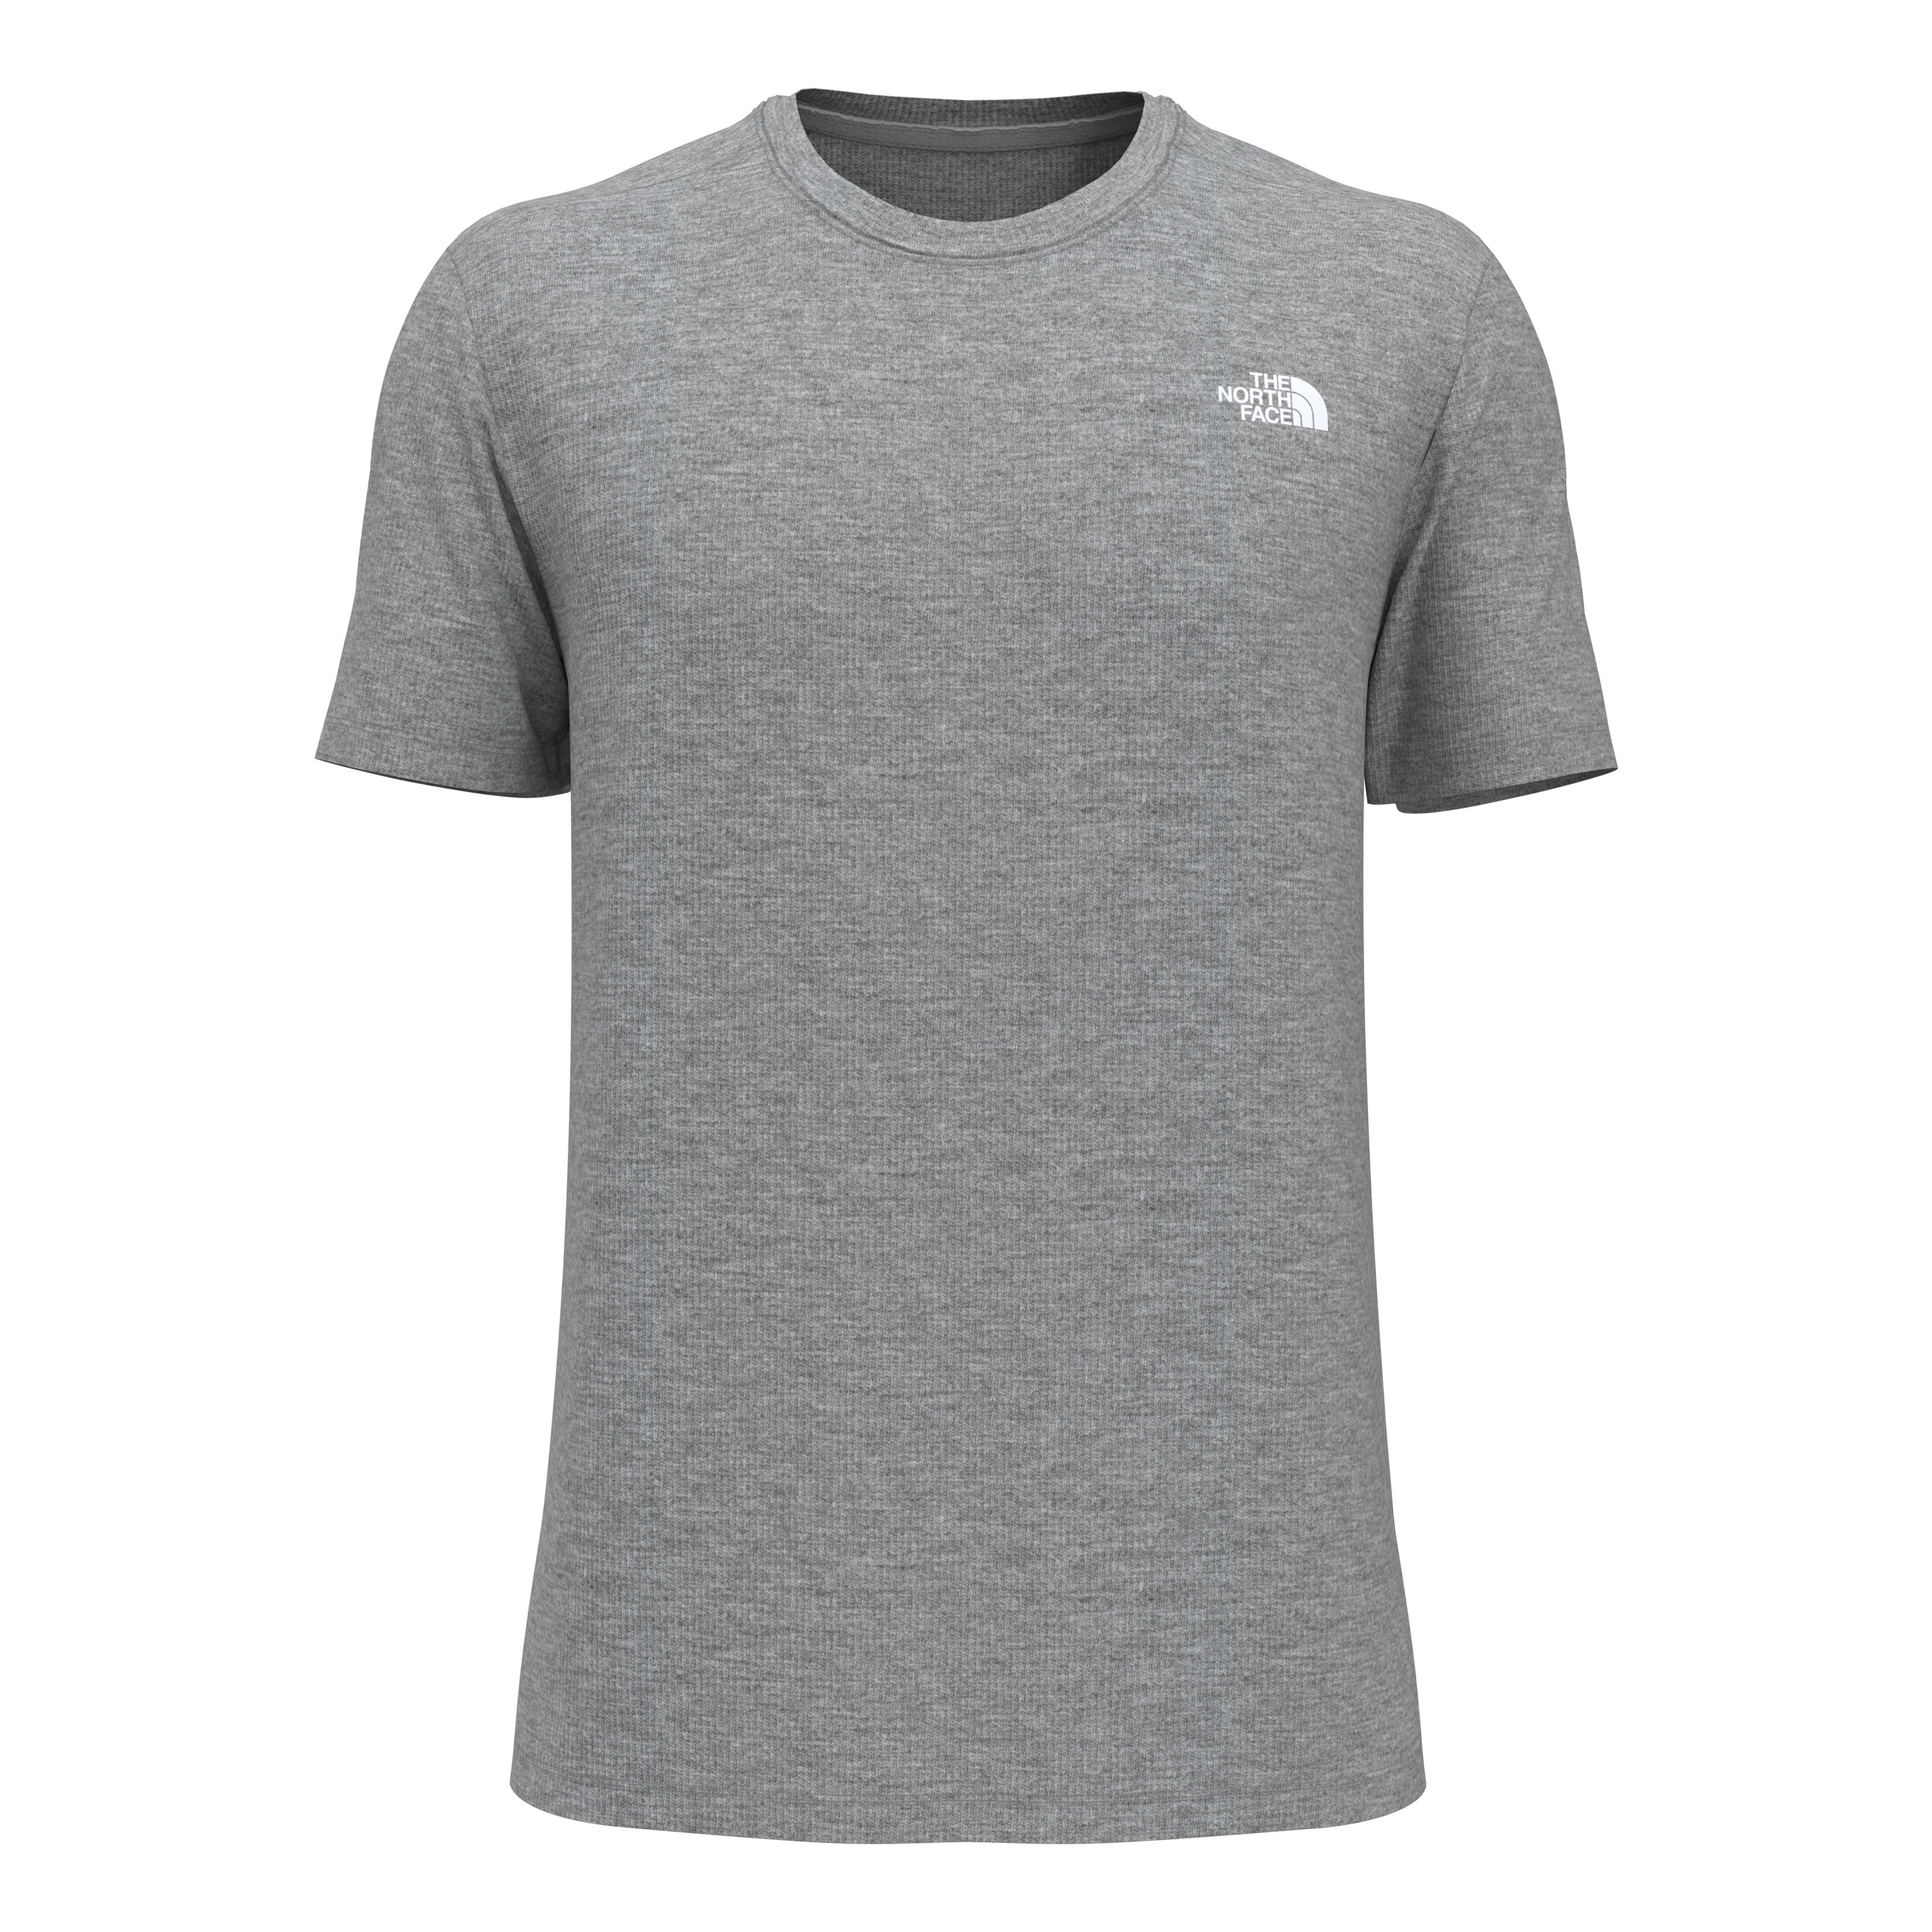 Men's The North Face Wander T-Shirt 2XLarge Meld Grey Heather